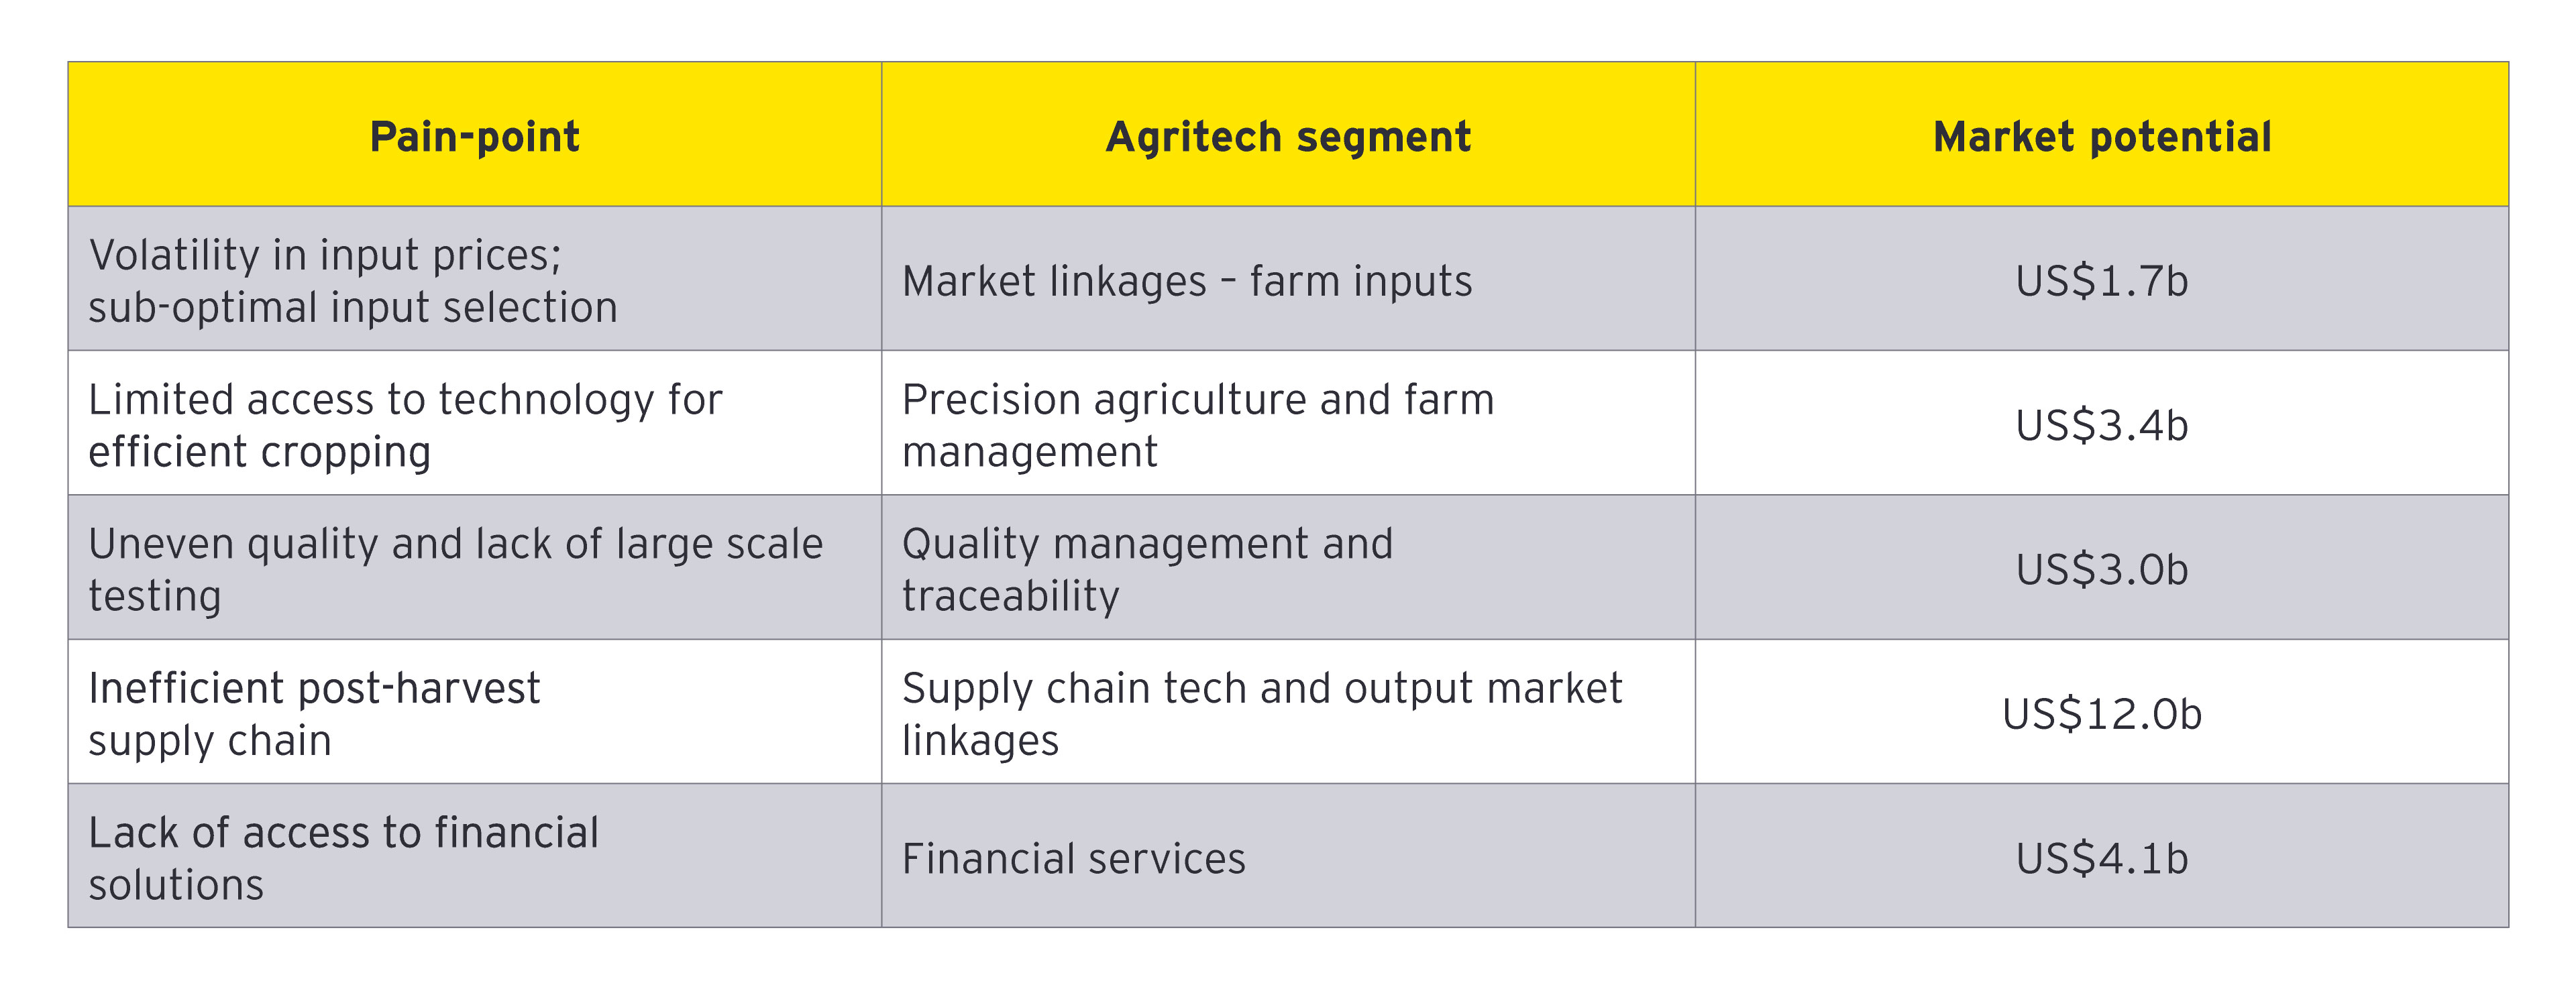 Adoption of technology in agriculture